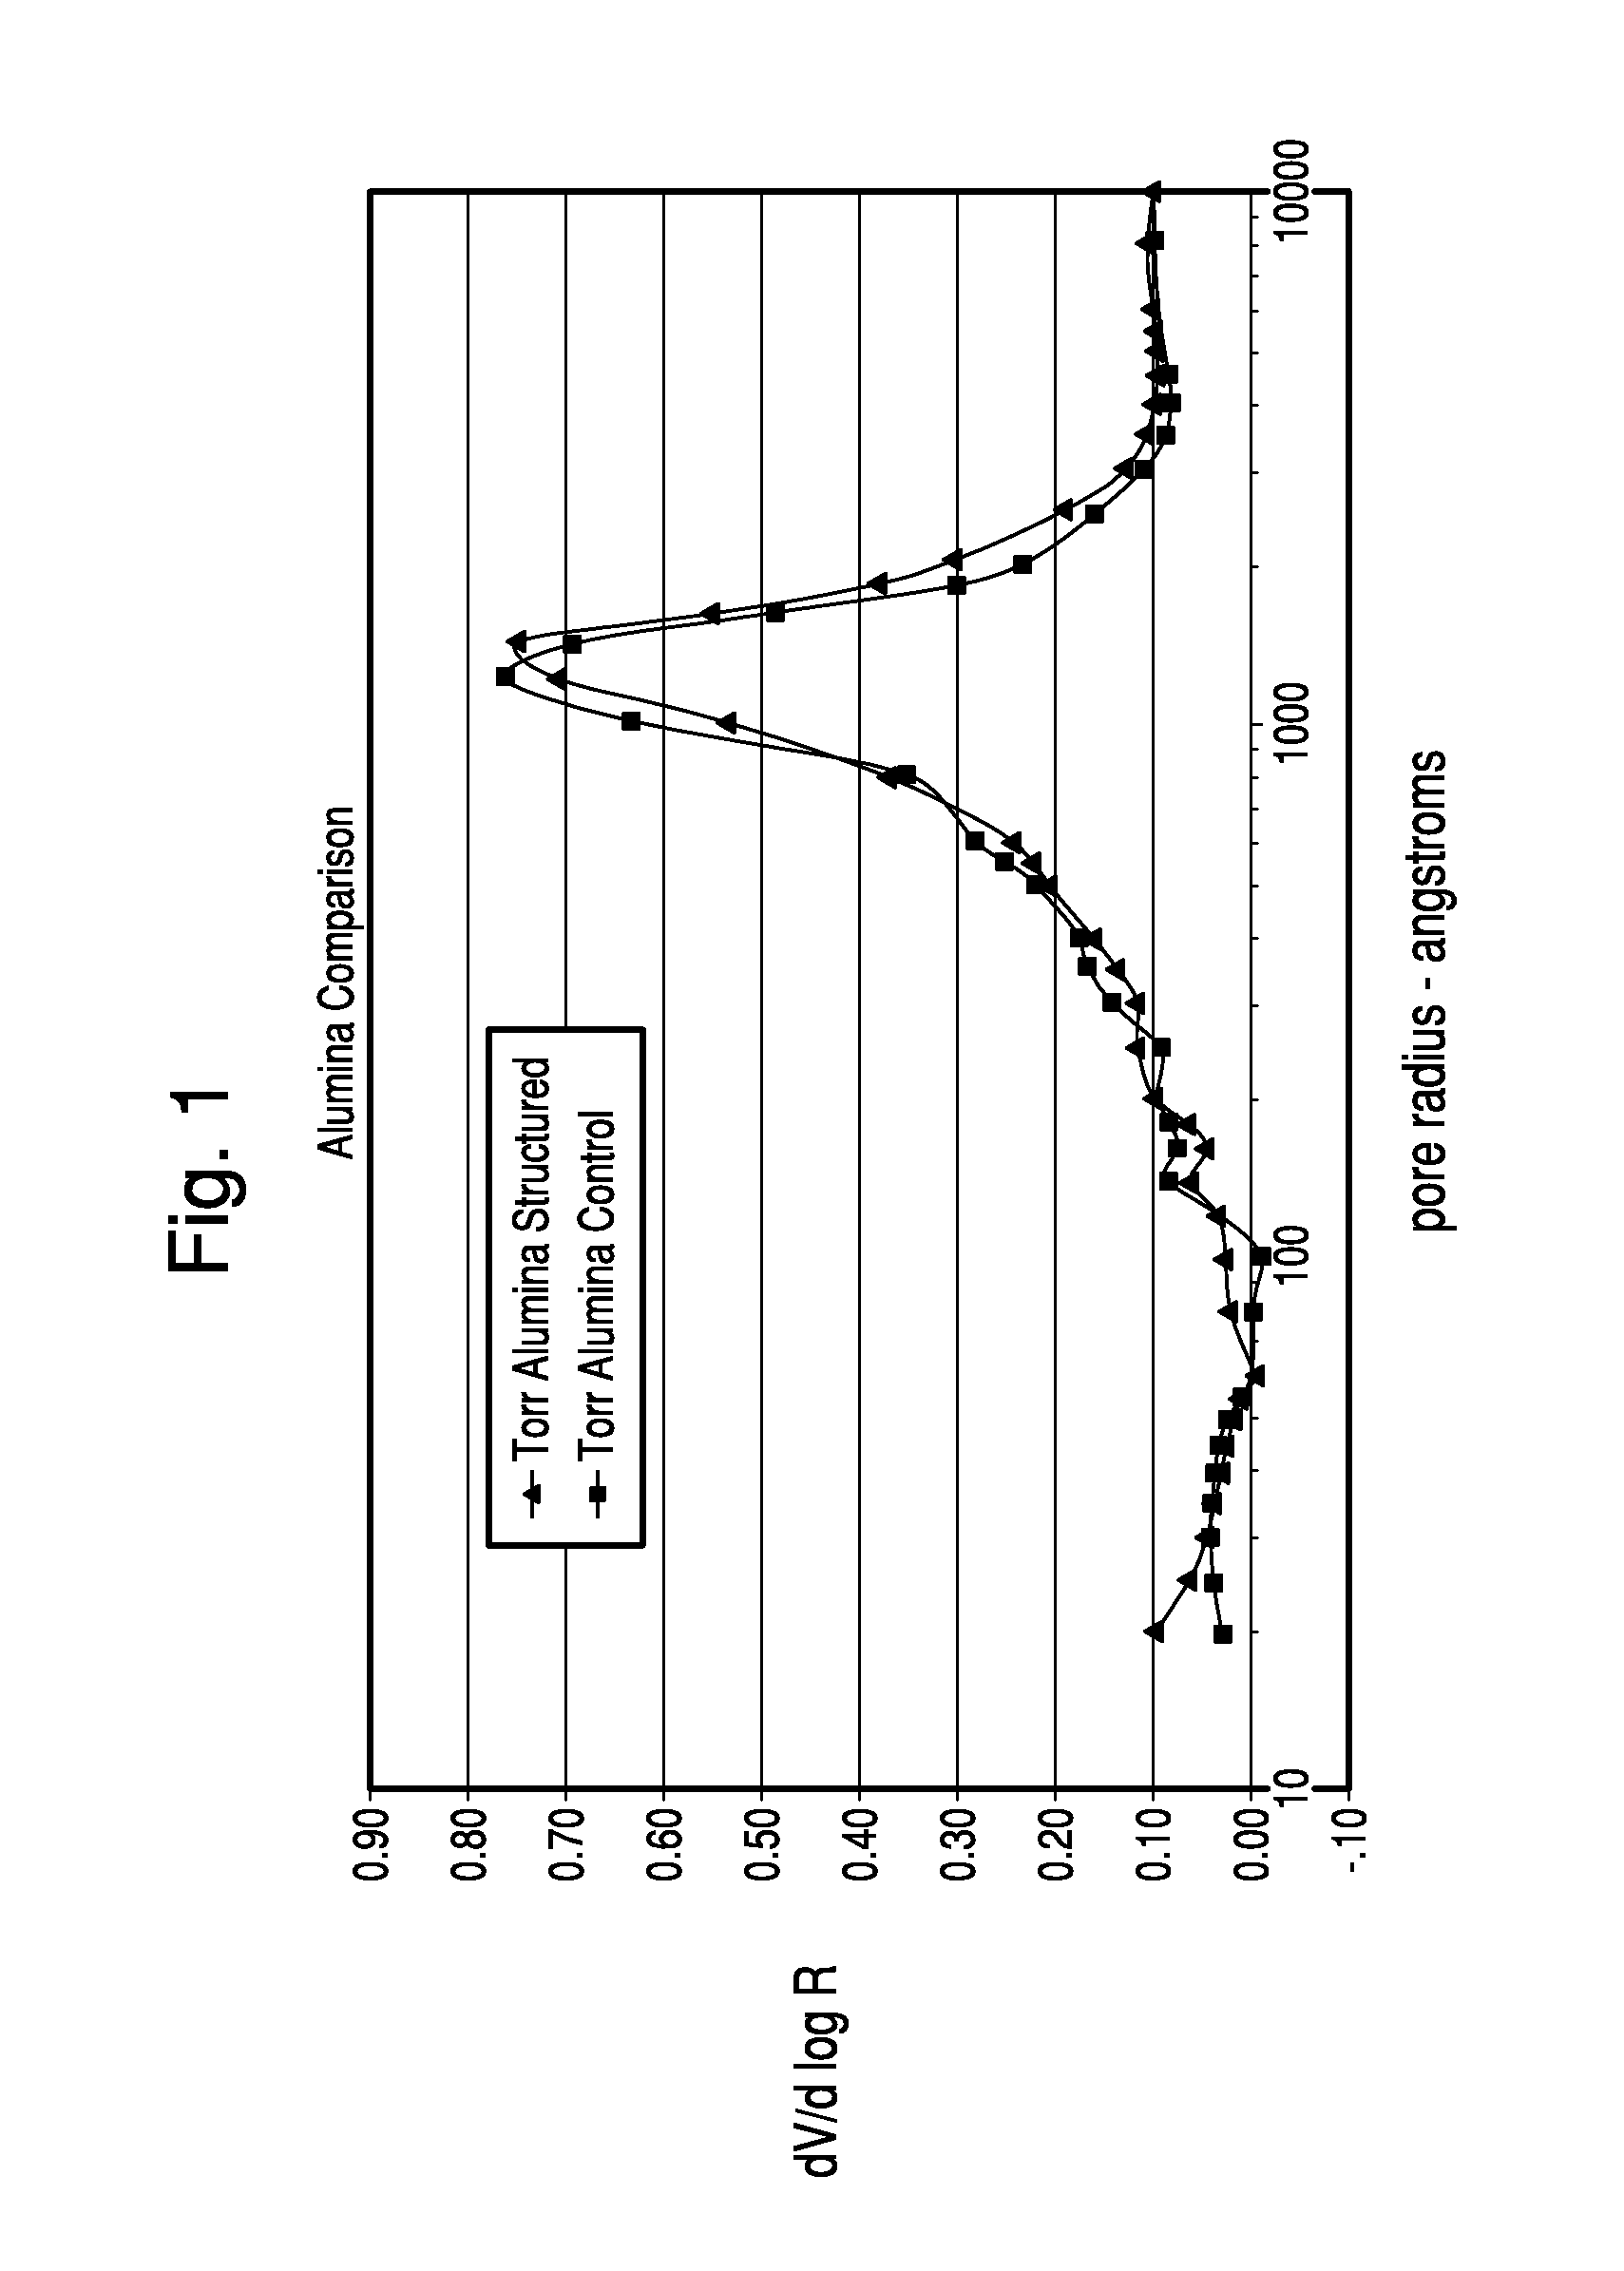 Thermochemical structuring of matrix components for FCC catalysts